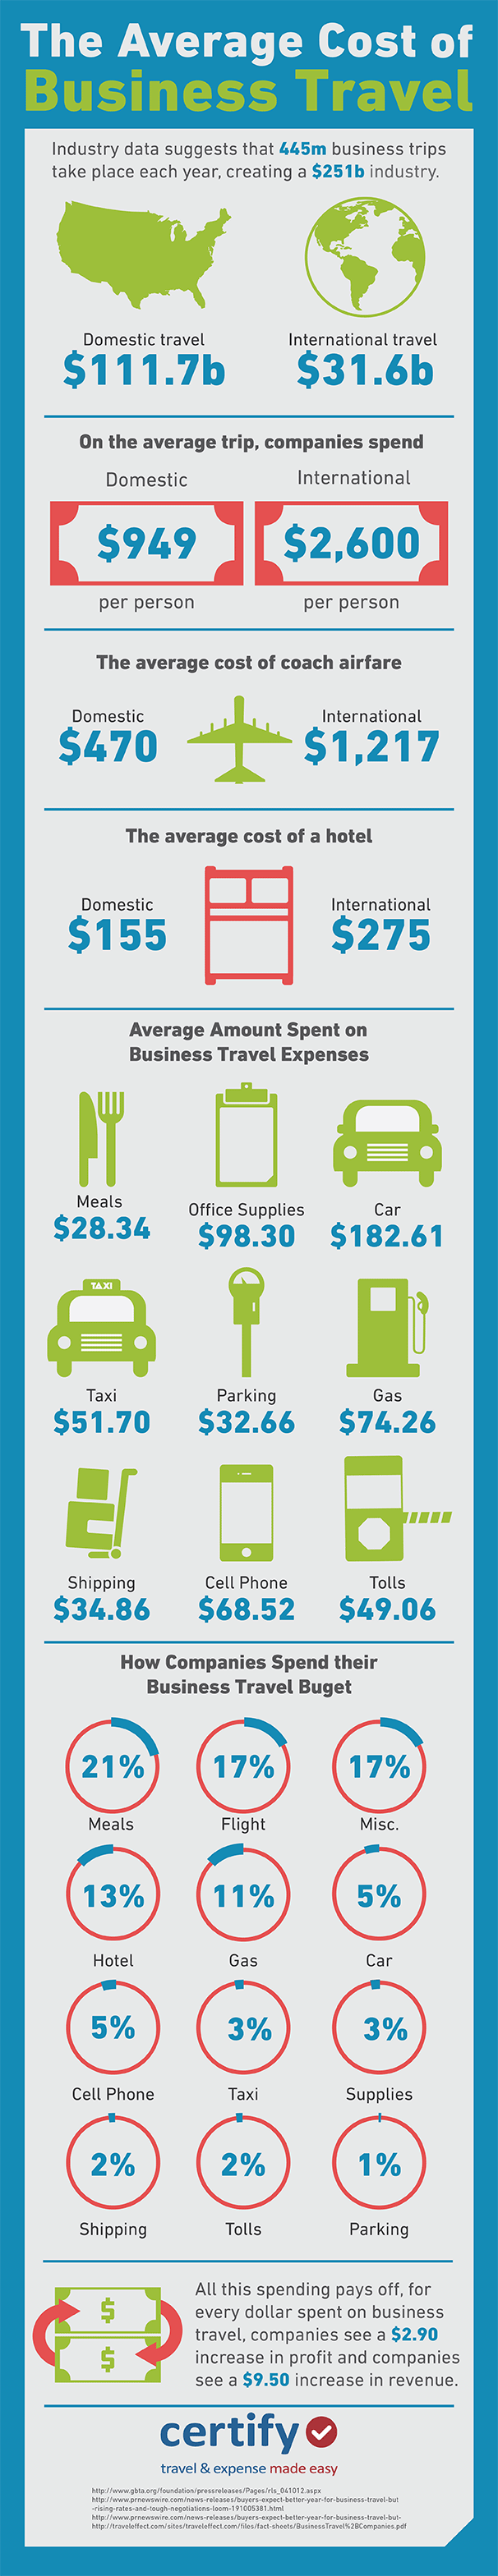 Average Cost of Business Travel